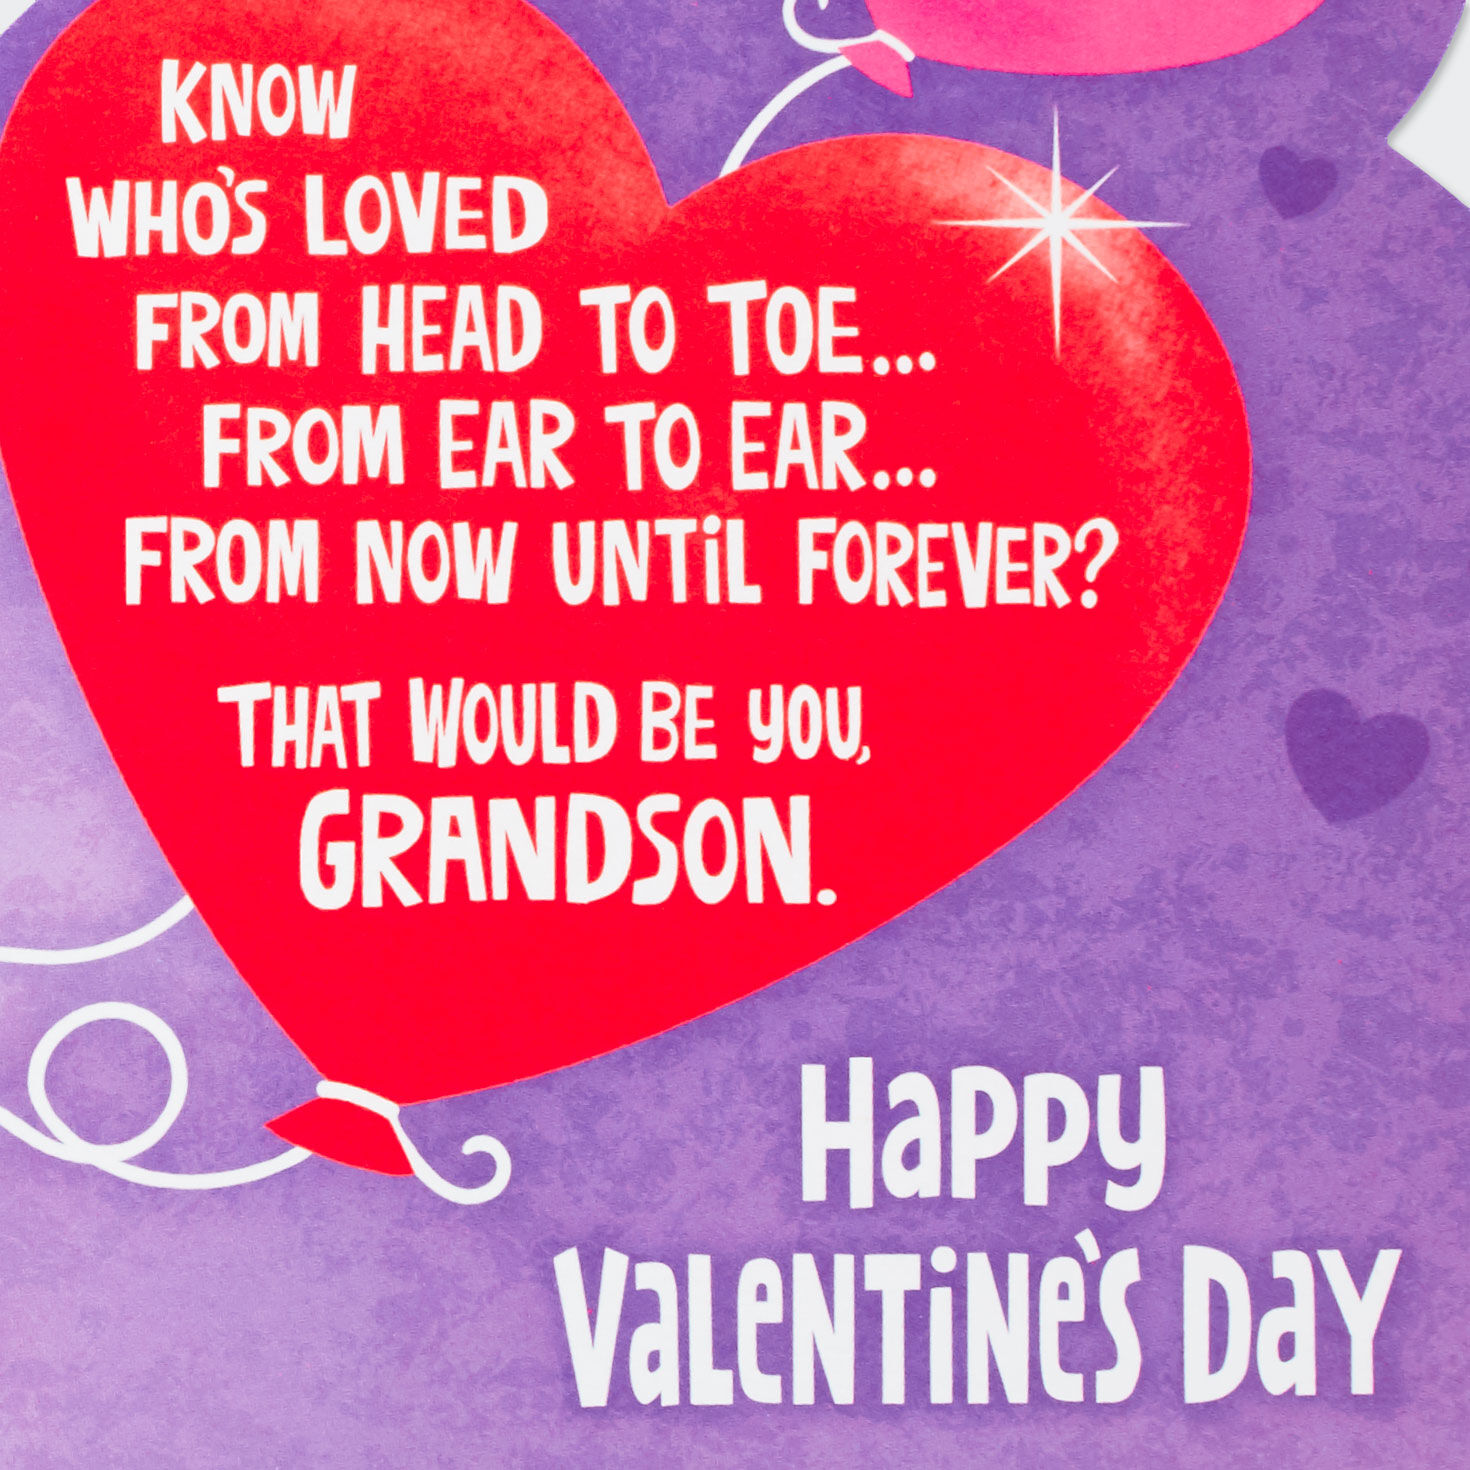 Disney Mickey Mouse So Loved Valentine's Day Card for Grandson for only USD 3.29 | Hallmark